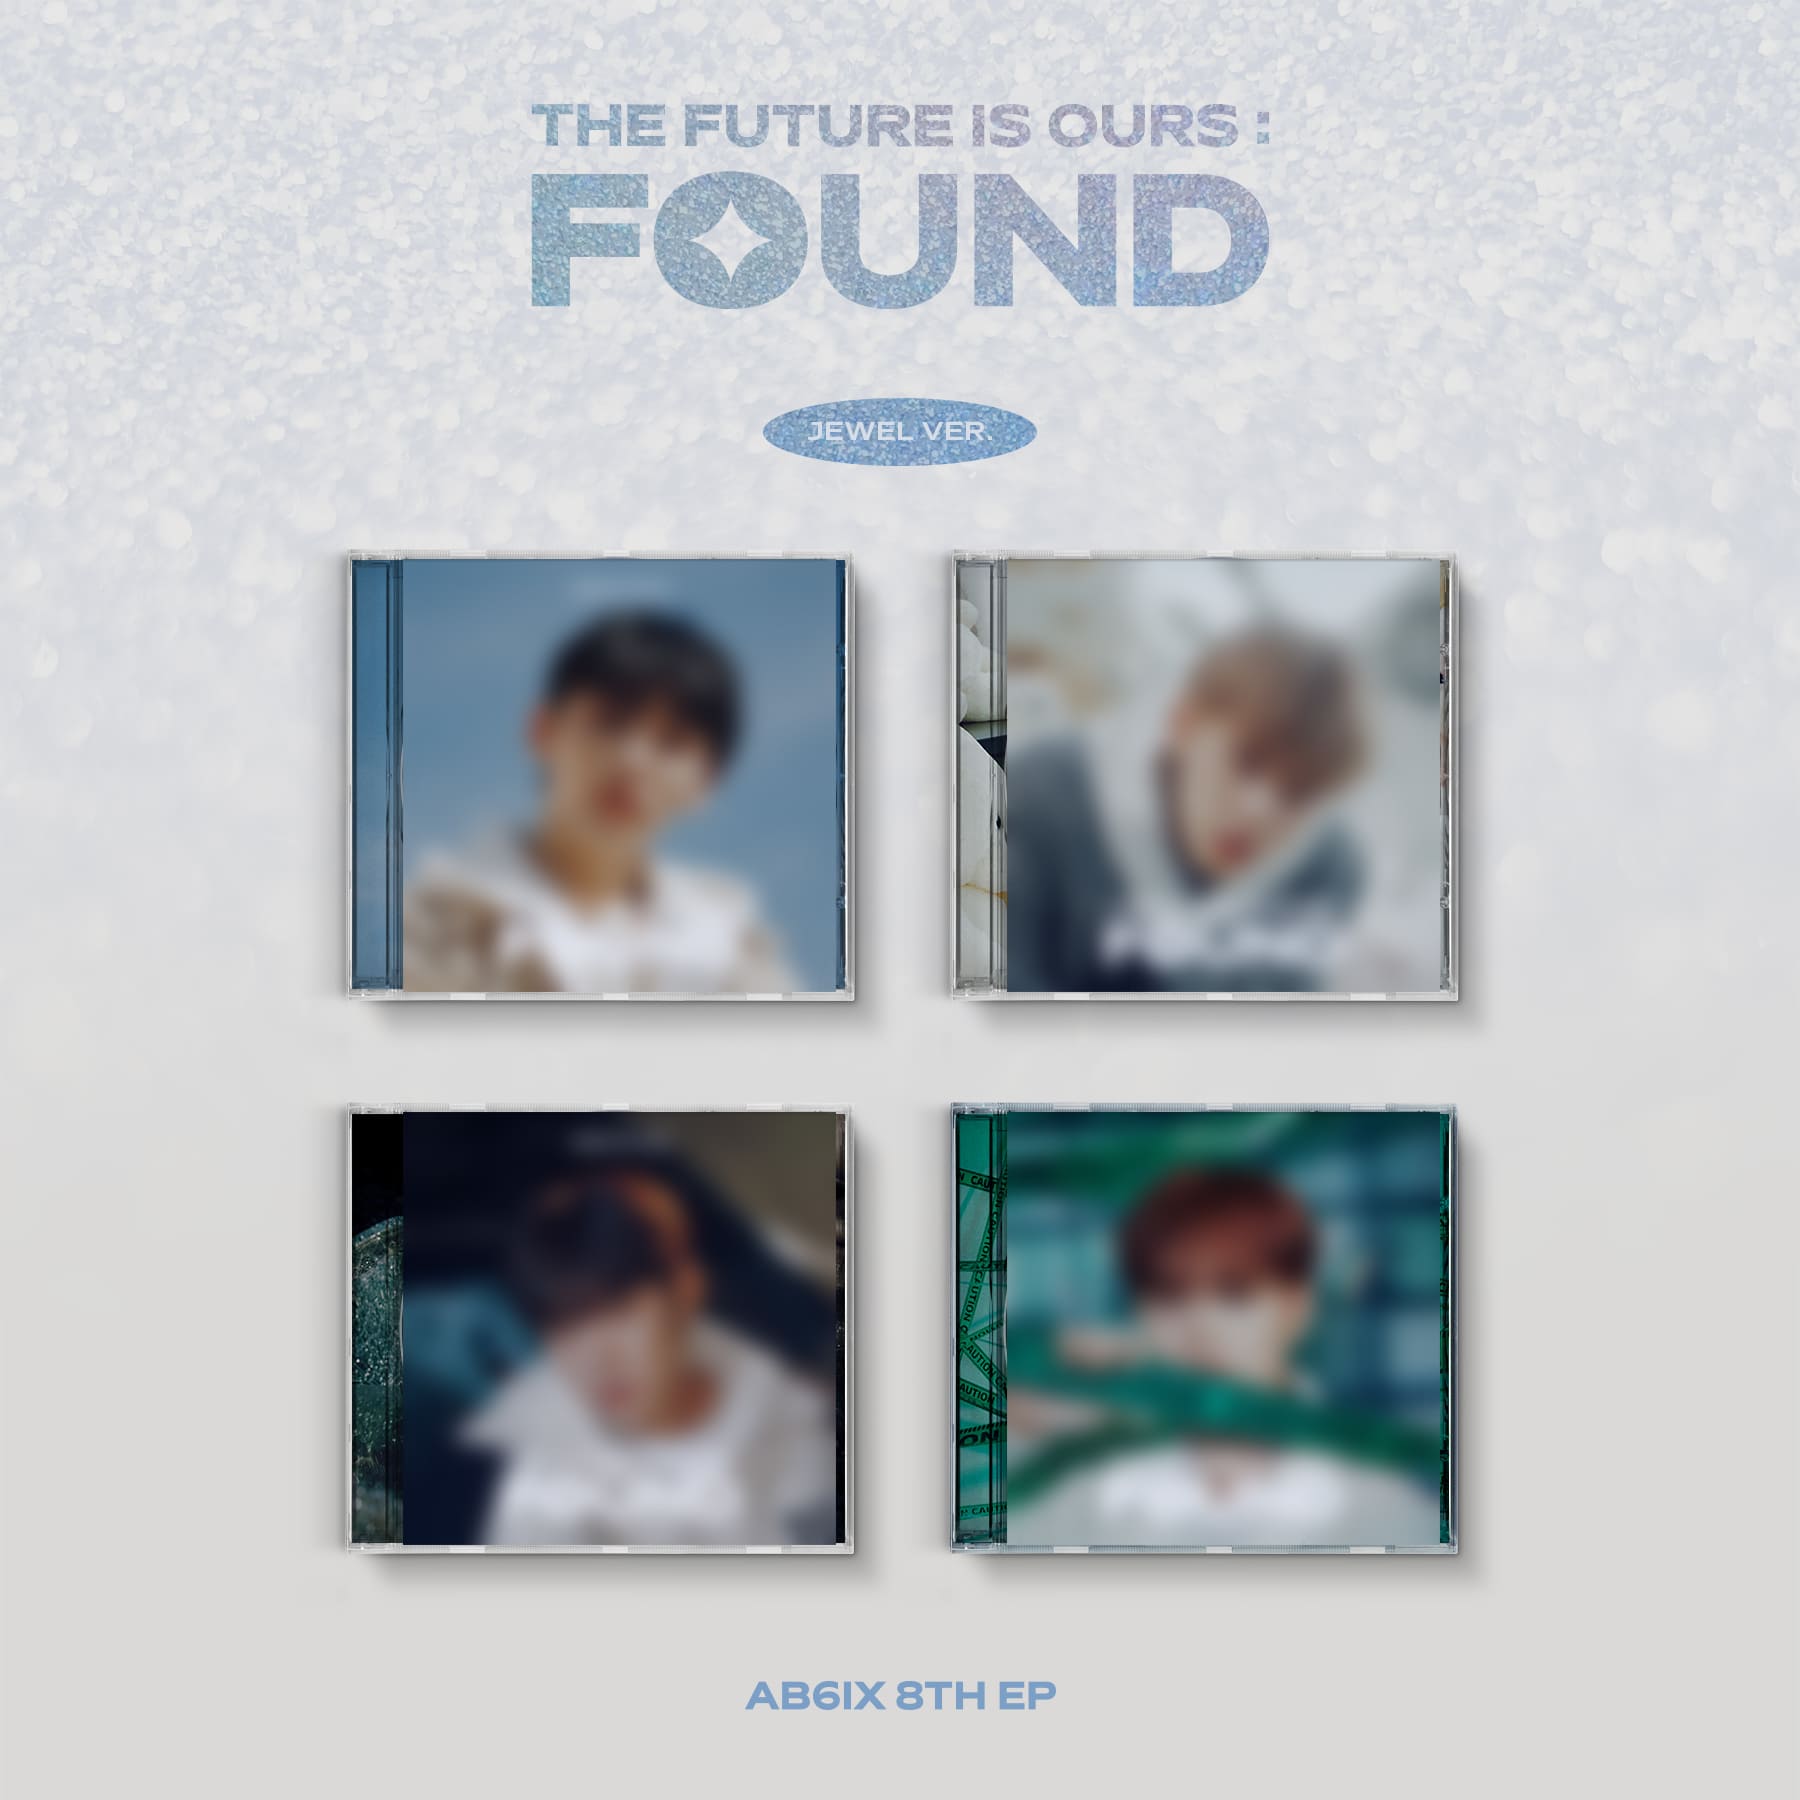 AB6IX 8th EP Album THE FUTURE IS OURS : FOUND (Jewel Version)